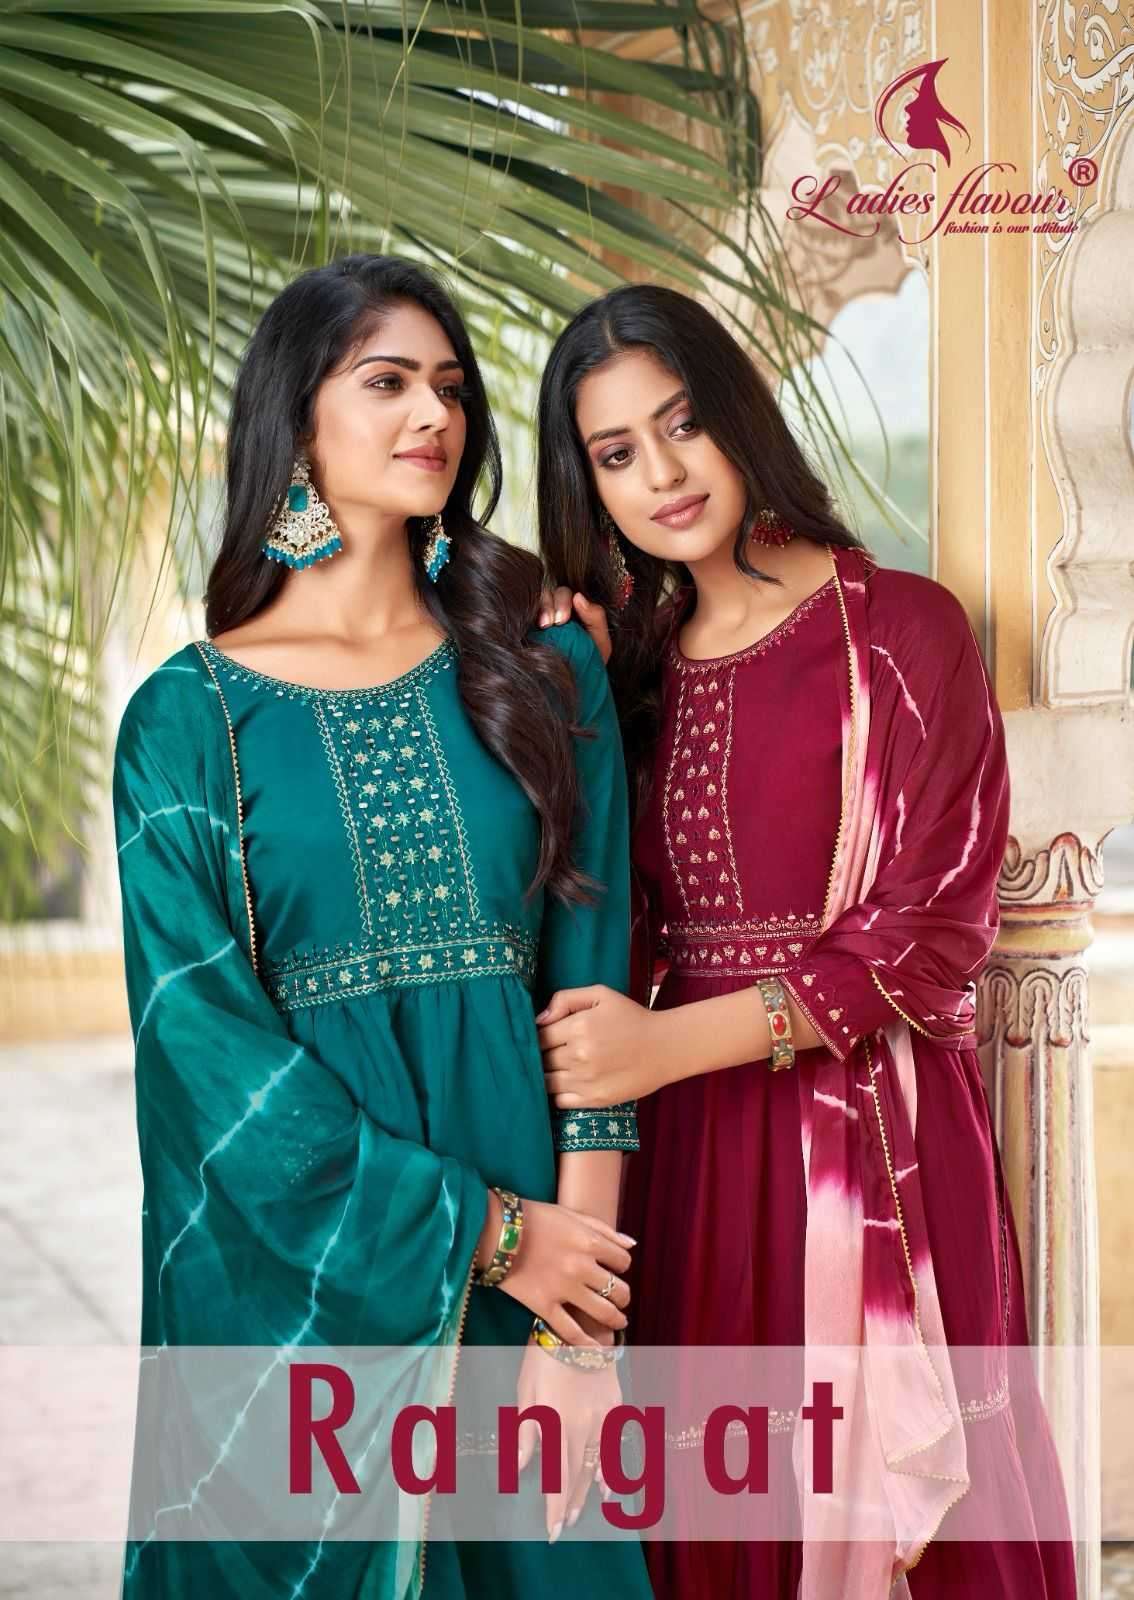 LADIES FLAVOUR RANGAT VISCOSE SILK WITH FANCY READYMADE SUITS COLLECITON AT BEST RATE